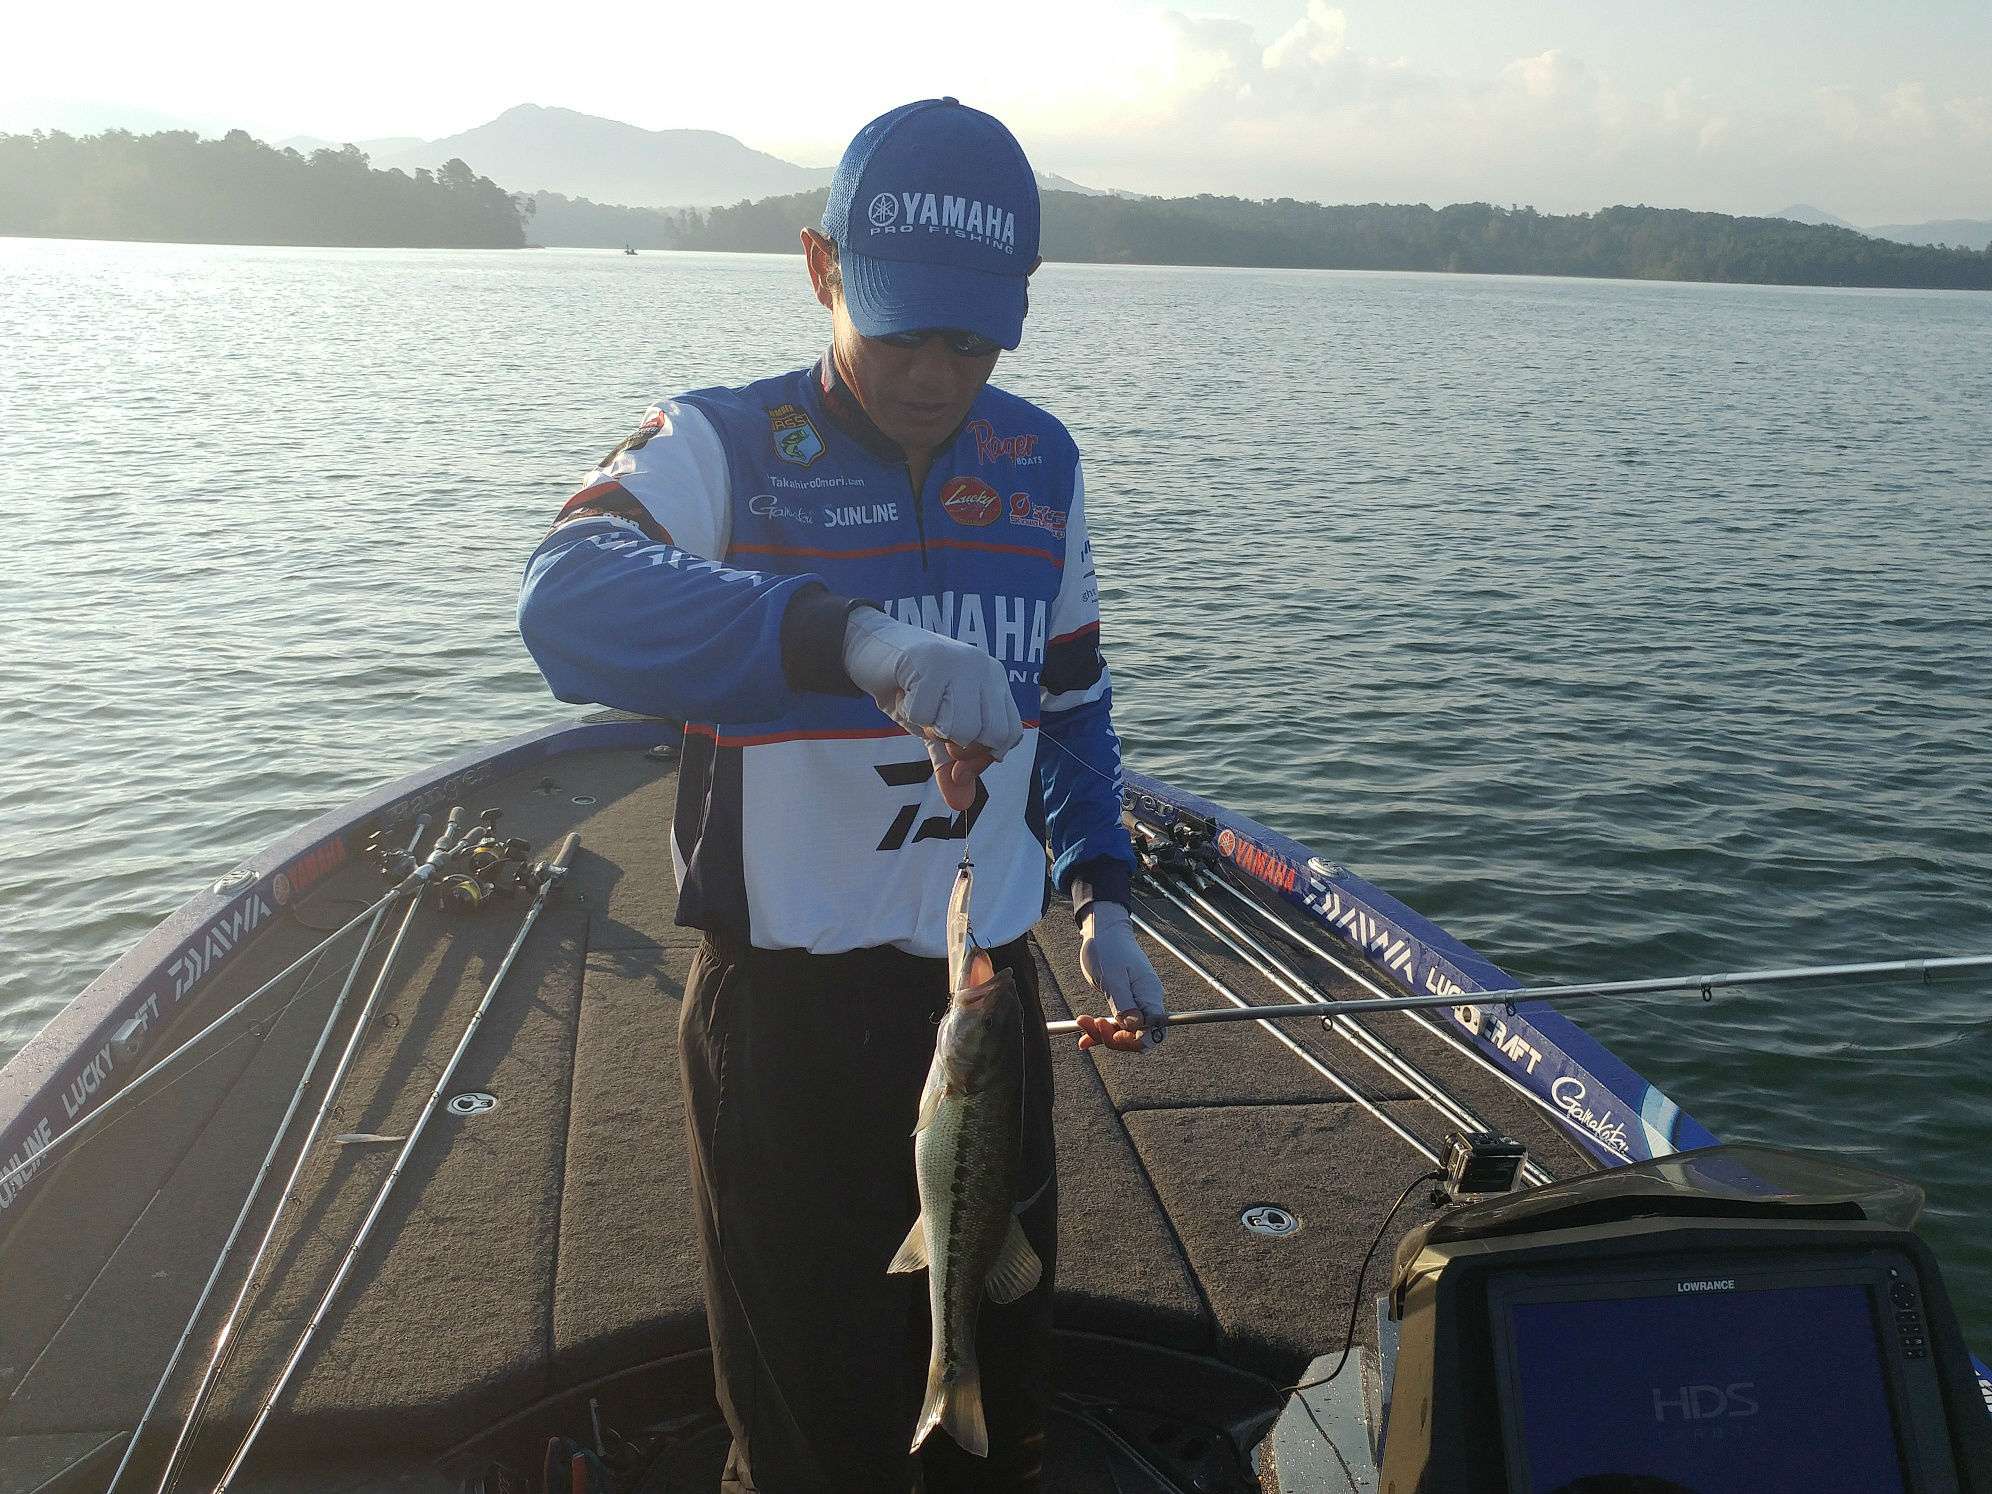 Takahiro Omori with No. 4. He is still hoping for that 4-pounder.